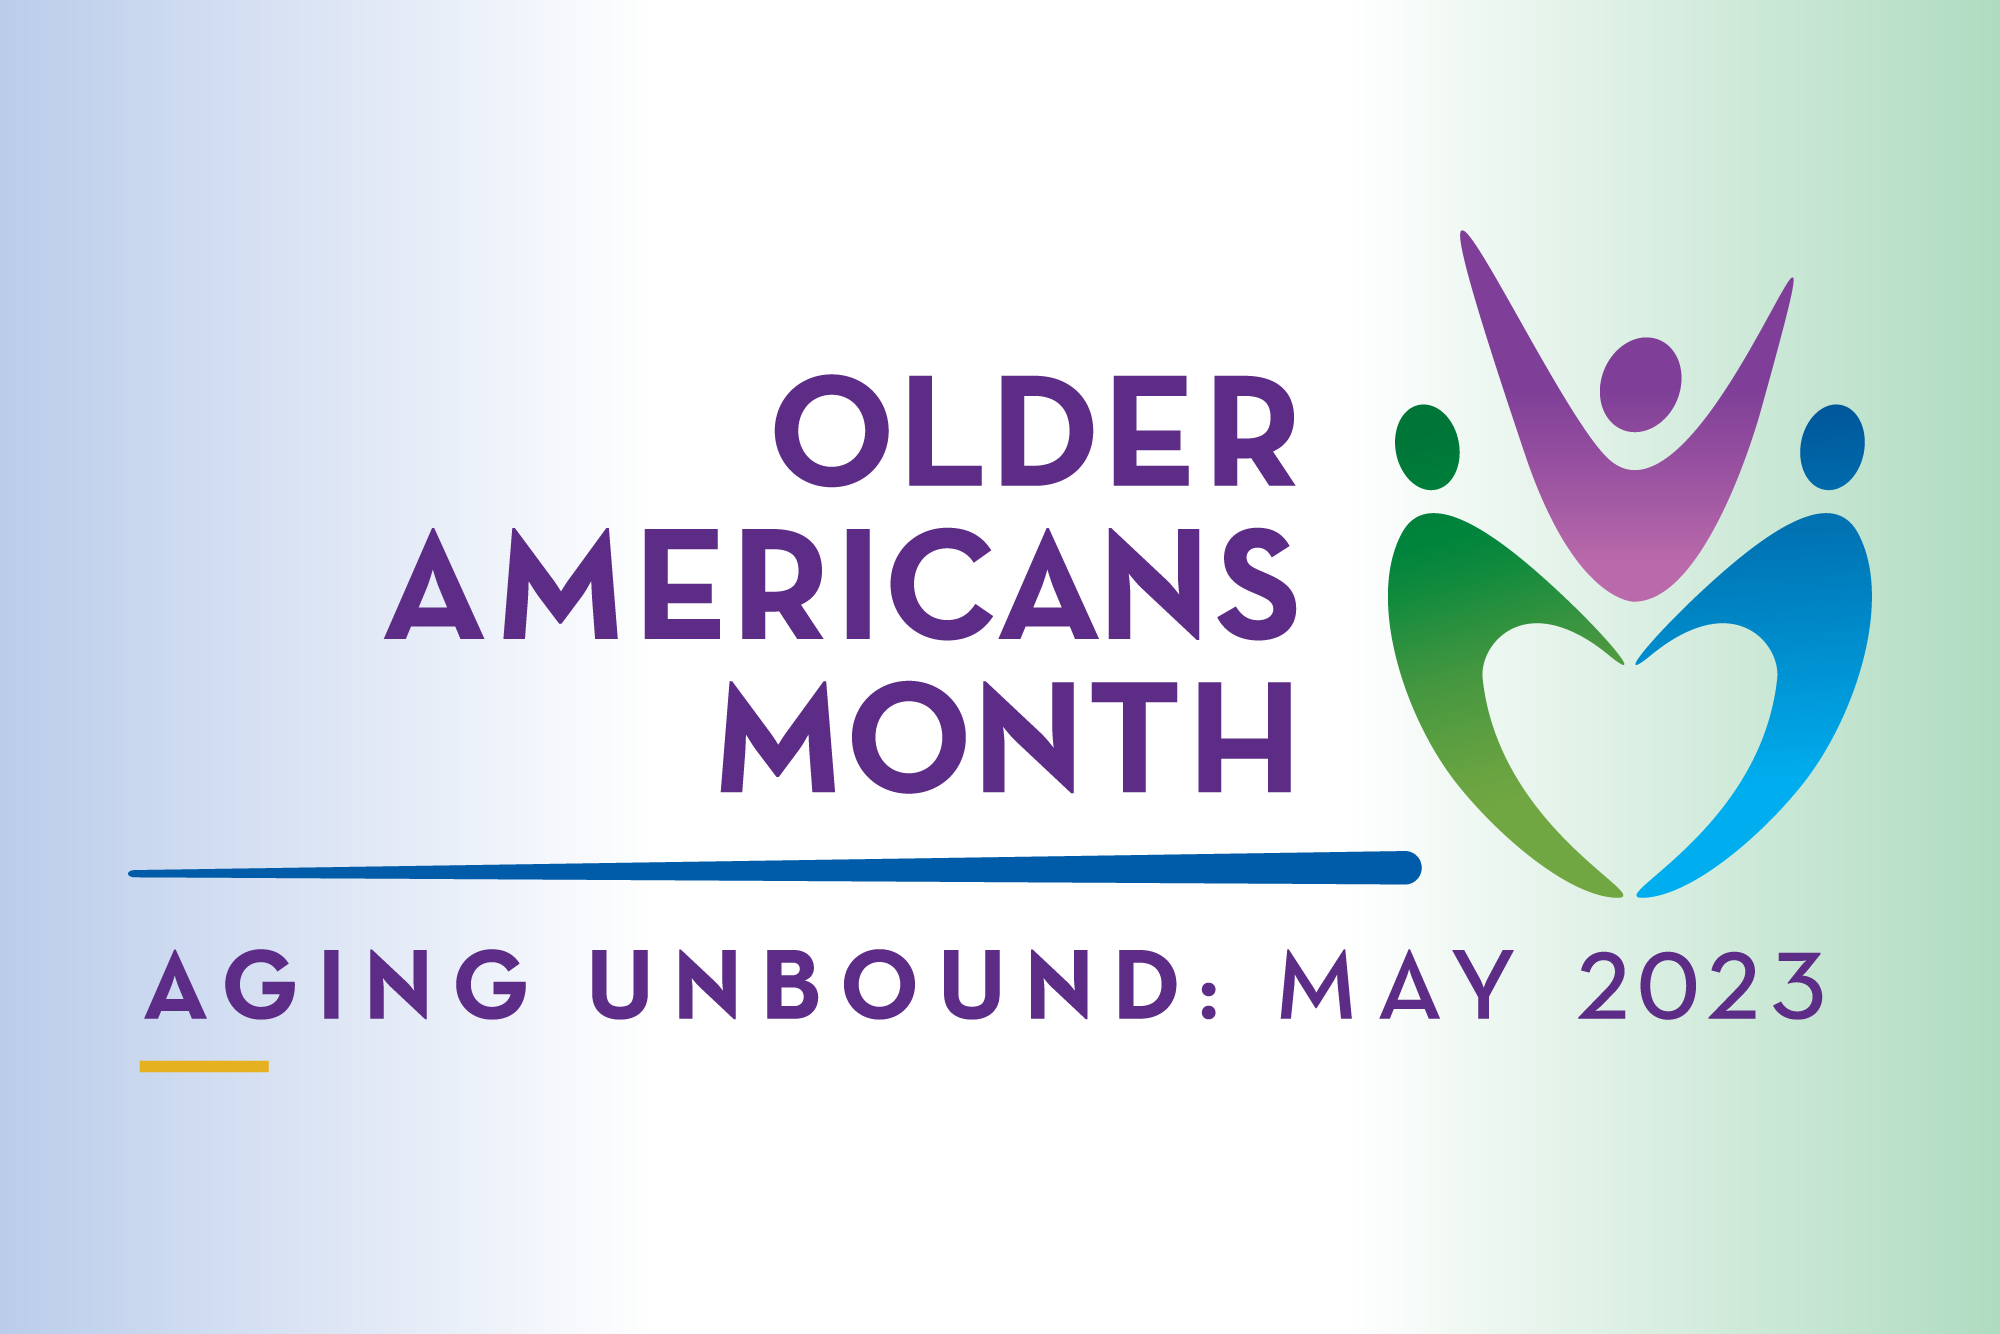 Older Americans Month - Aging Unbound: May 2023